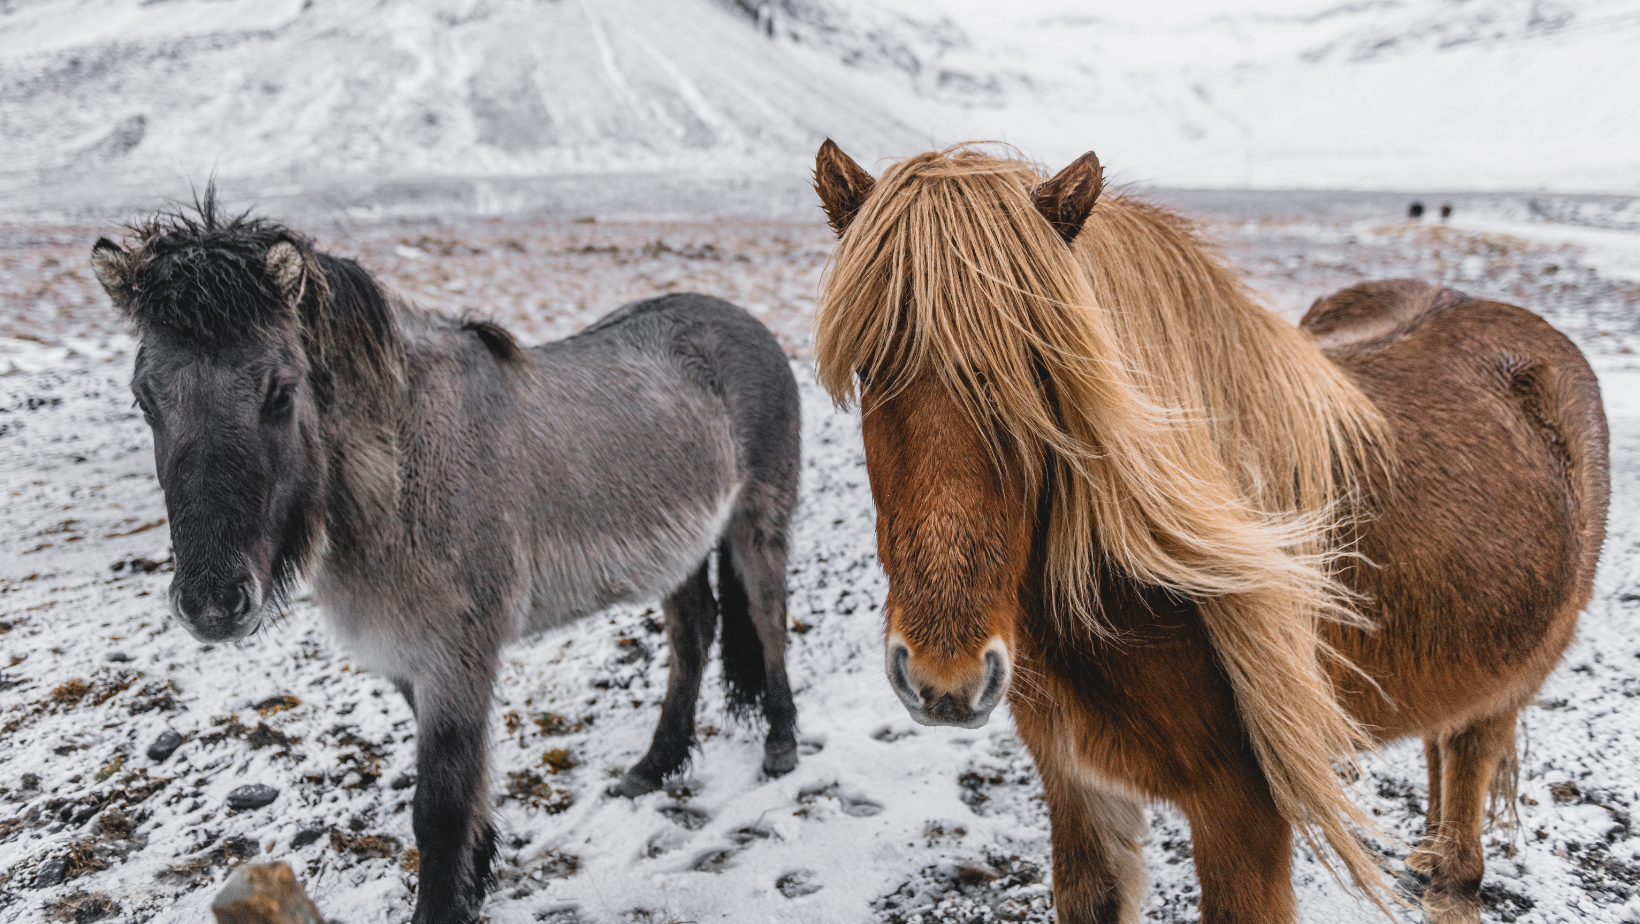 A grey and black Icelandic horse and a brown and blonde horse on snow between mountains